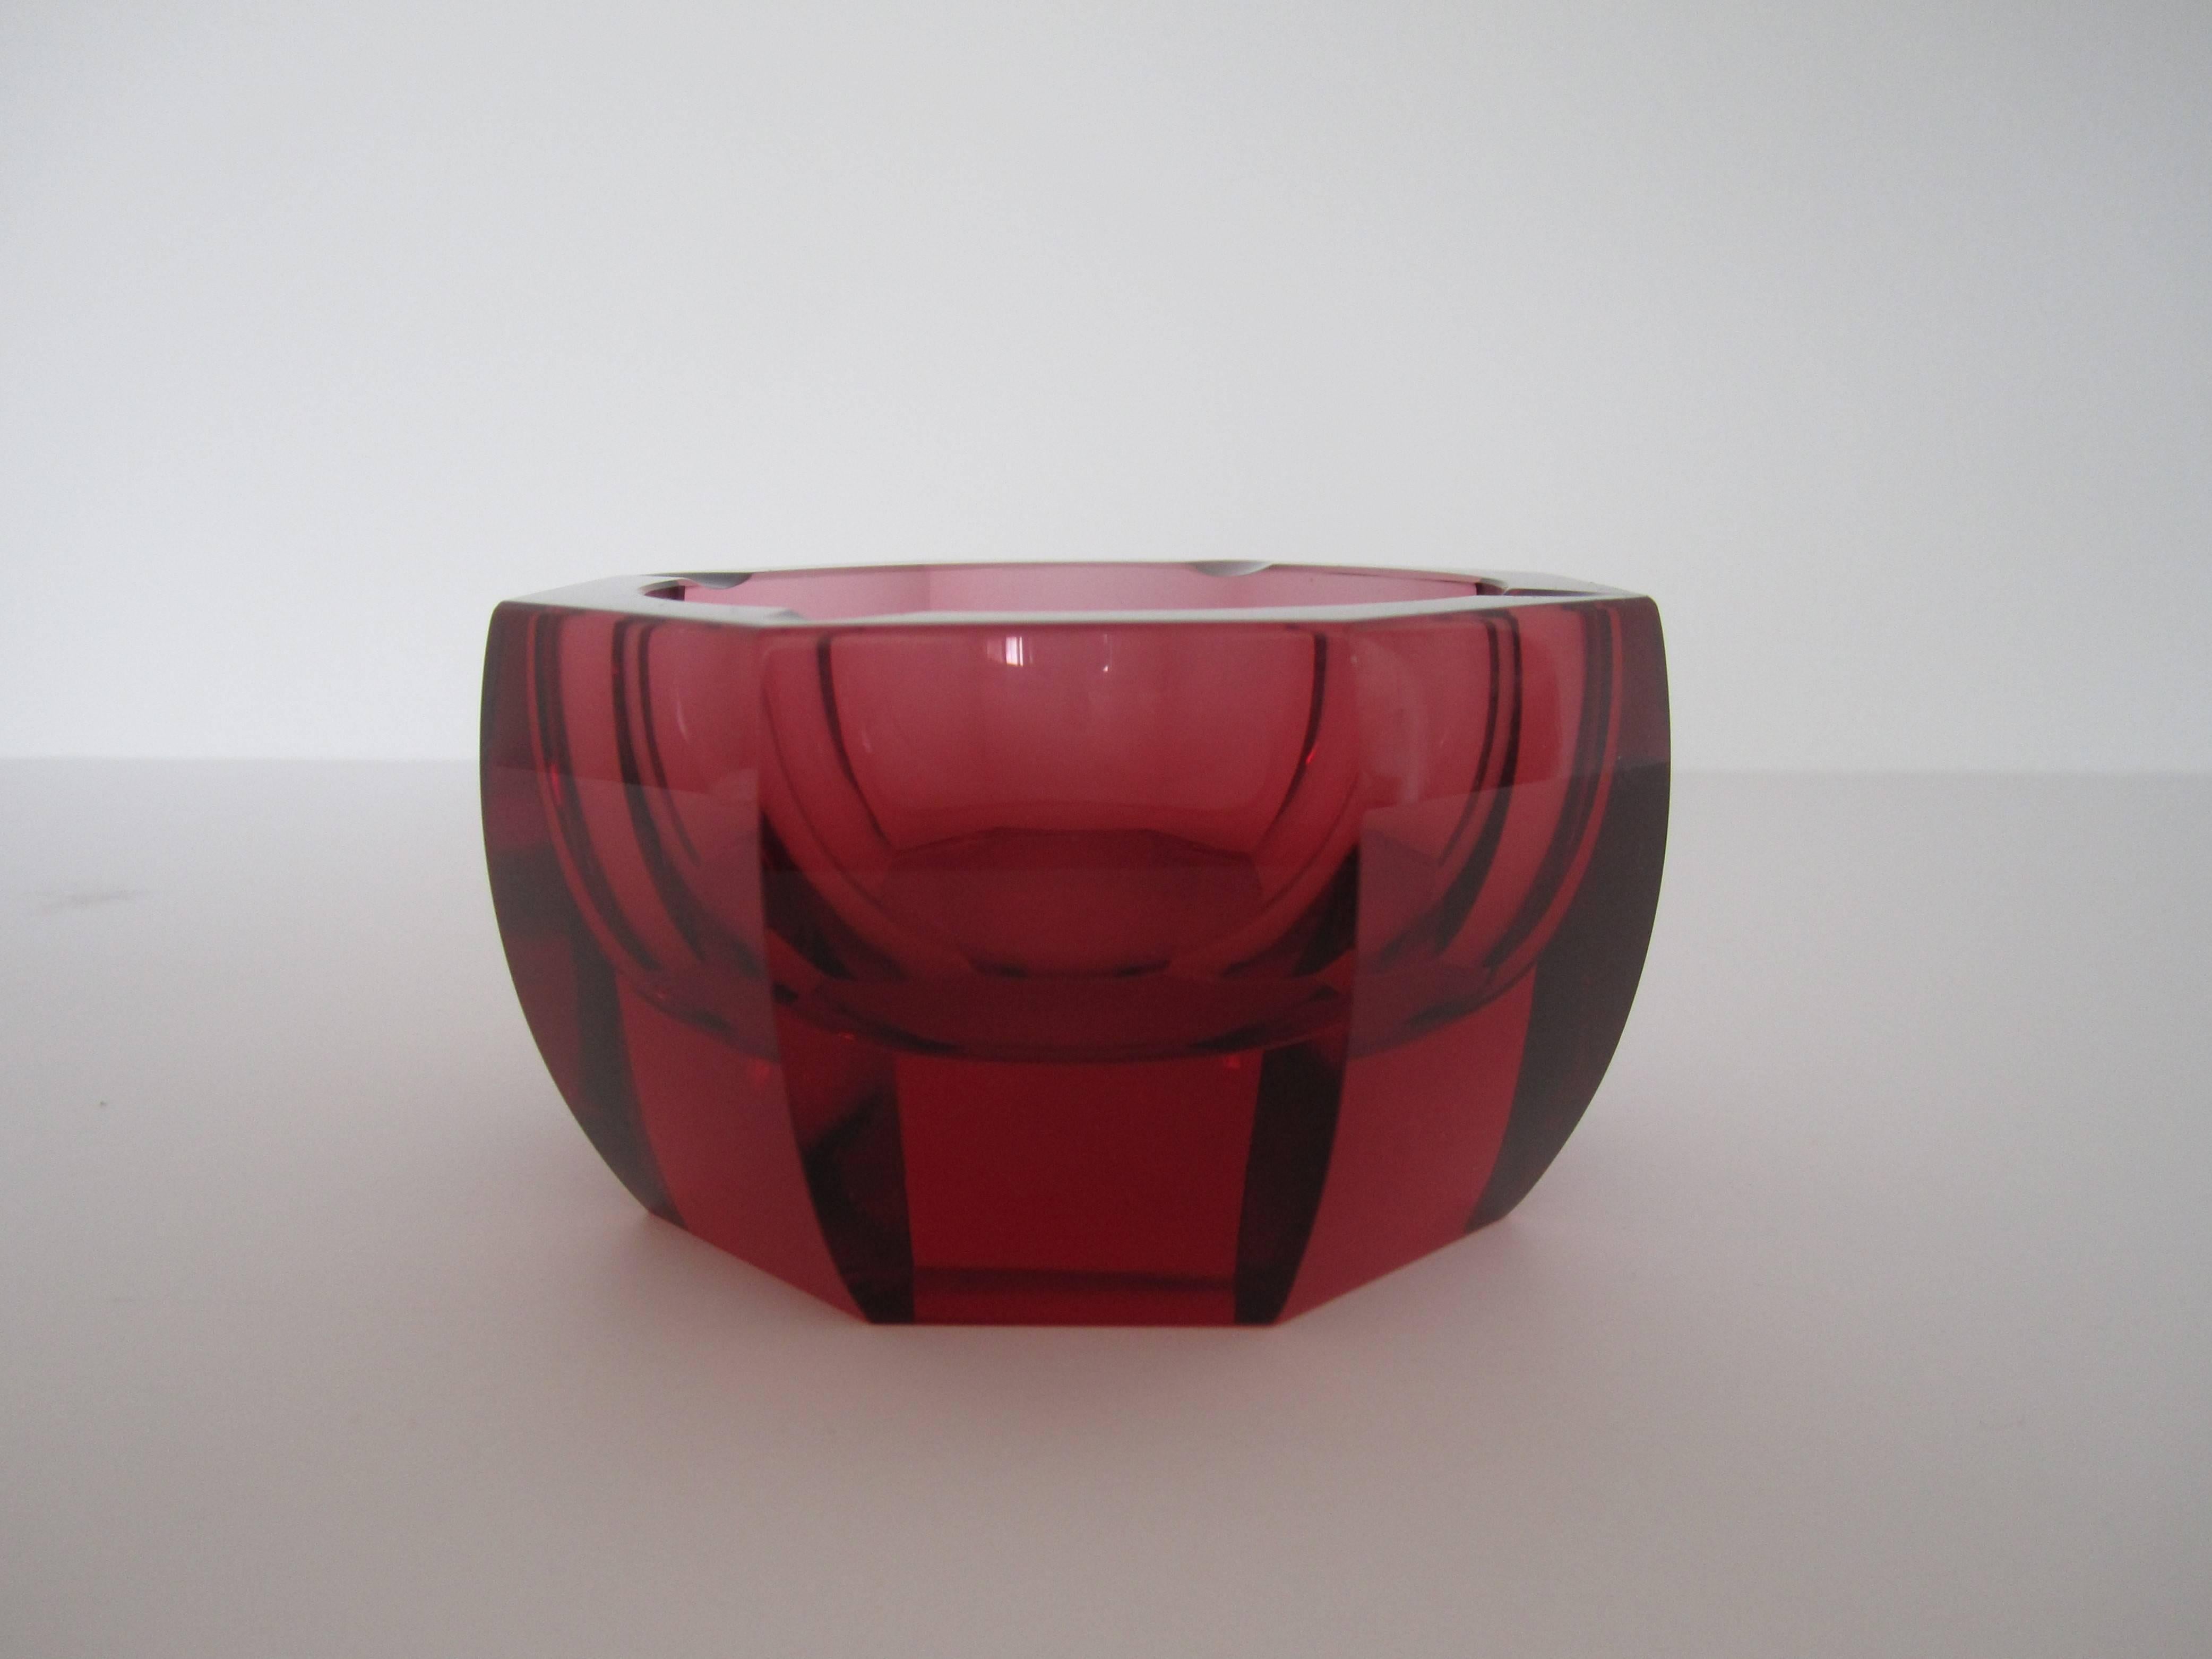 Czech Gorgeous Red Octagonal Crystal Bowl or Ashtray by Moser